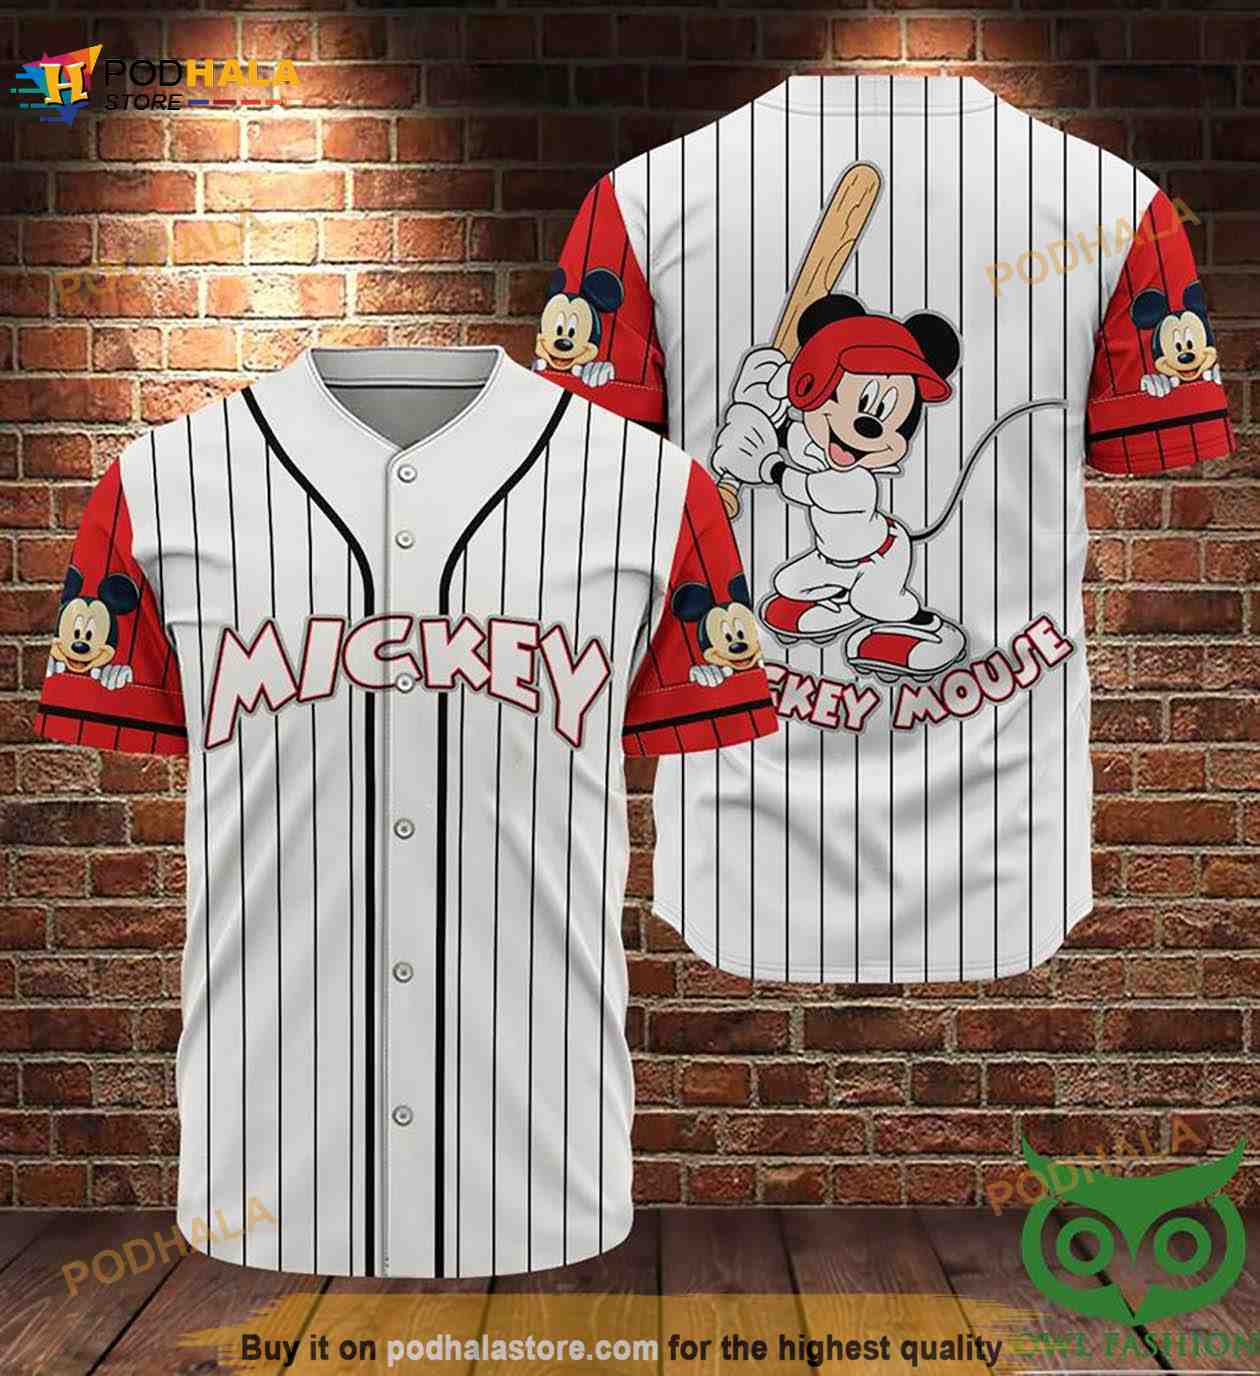 Mickey Mouse Red And White 3D Baseball Jersey Shirt - Bring Your